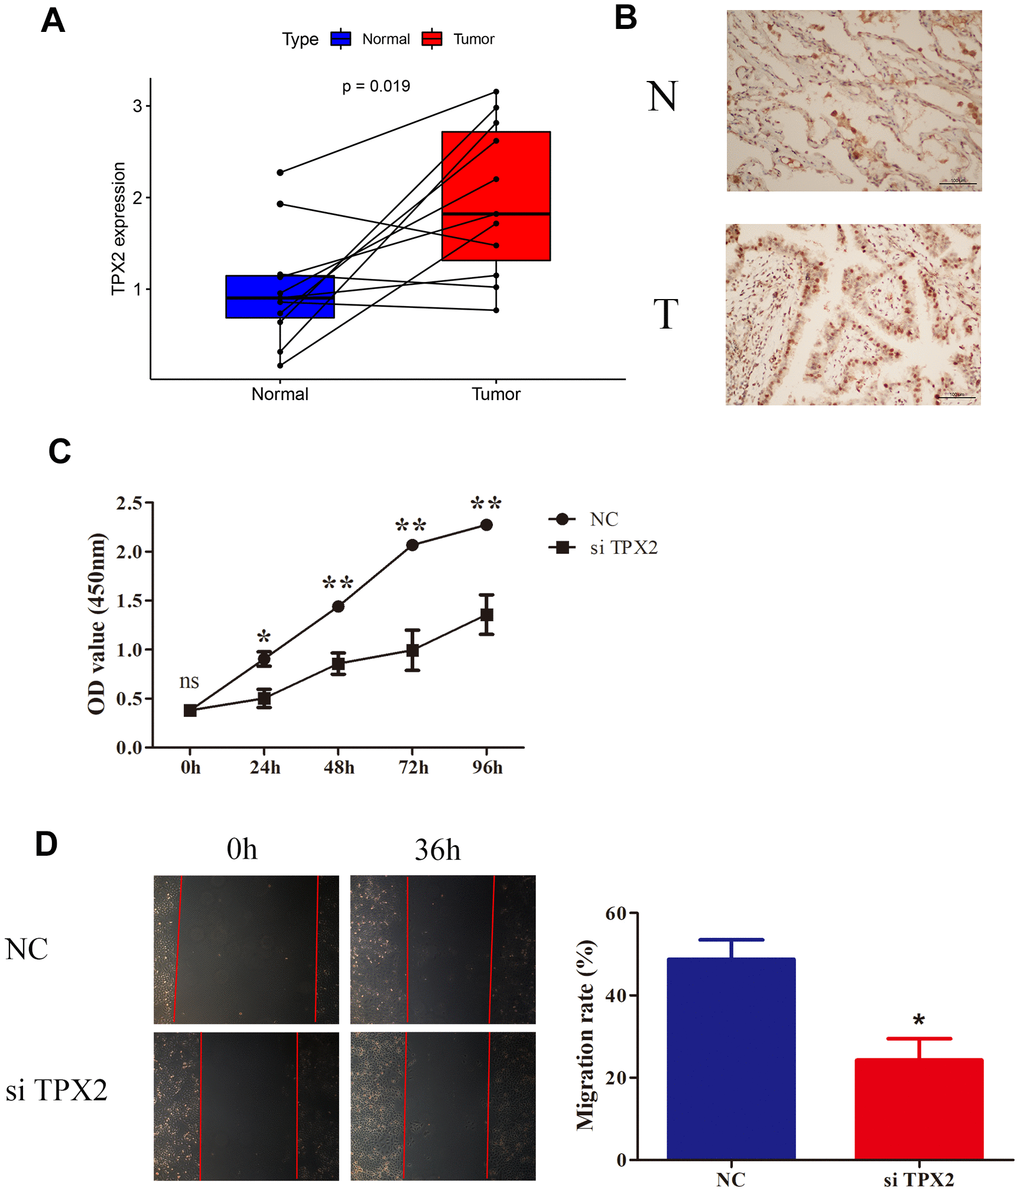 Knockdown of TPX2 inhibited proliferation and migration of LUAD. (A) TPX2 mRNA expression levels were higher in 11 LUAD tissues than that in matched normal tissue samples. Y-axis data presents relative expression (normalized to GAPDH; calculated using the 2−ΔΔCt method). (B) Immunohistochemical analysis of TPX2 in LUAD tissues. Representative images are shown. (C) CCK8 assay suggested that knockdown of TPX2 inhibited the proliferation of A549 cells. (D) The wound healing assay suggested that knockdown of TPX2 reduced cell migration of A549 cells. *p